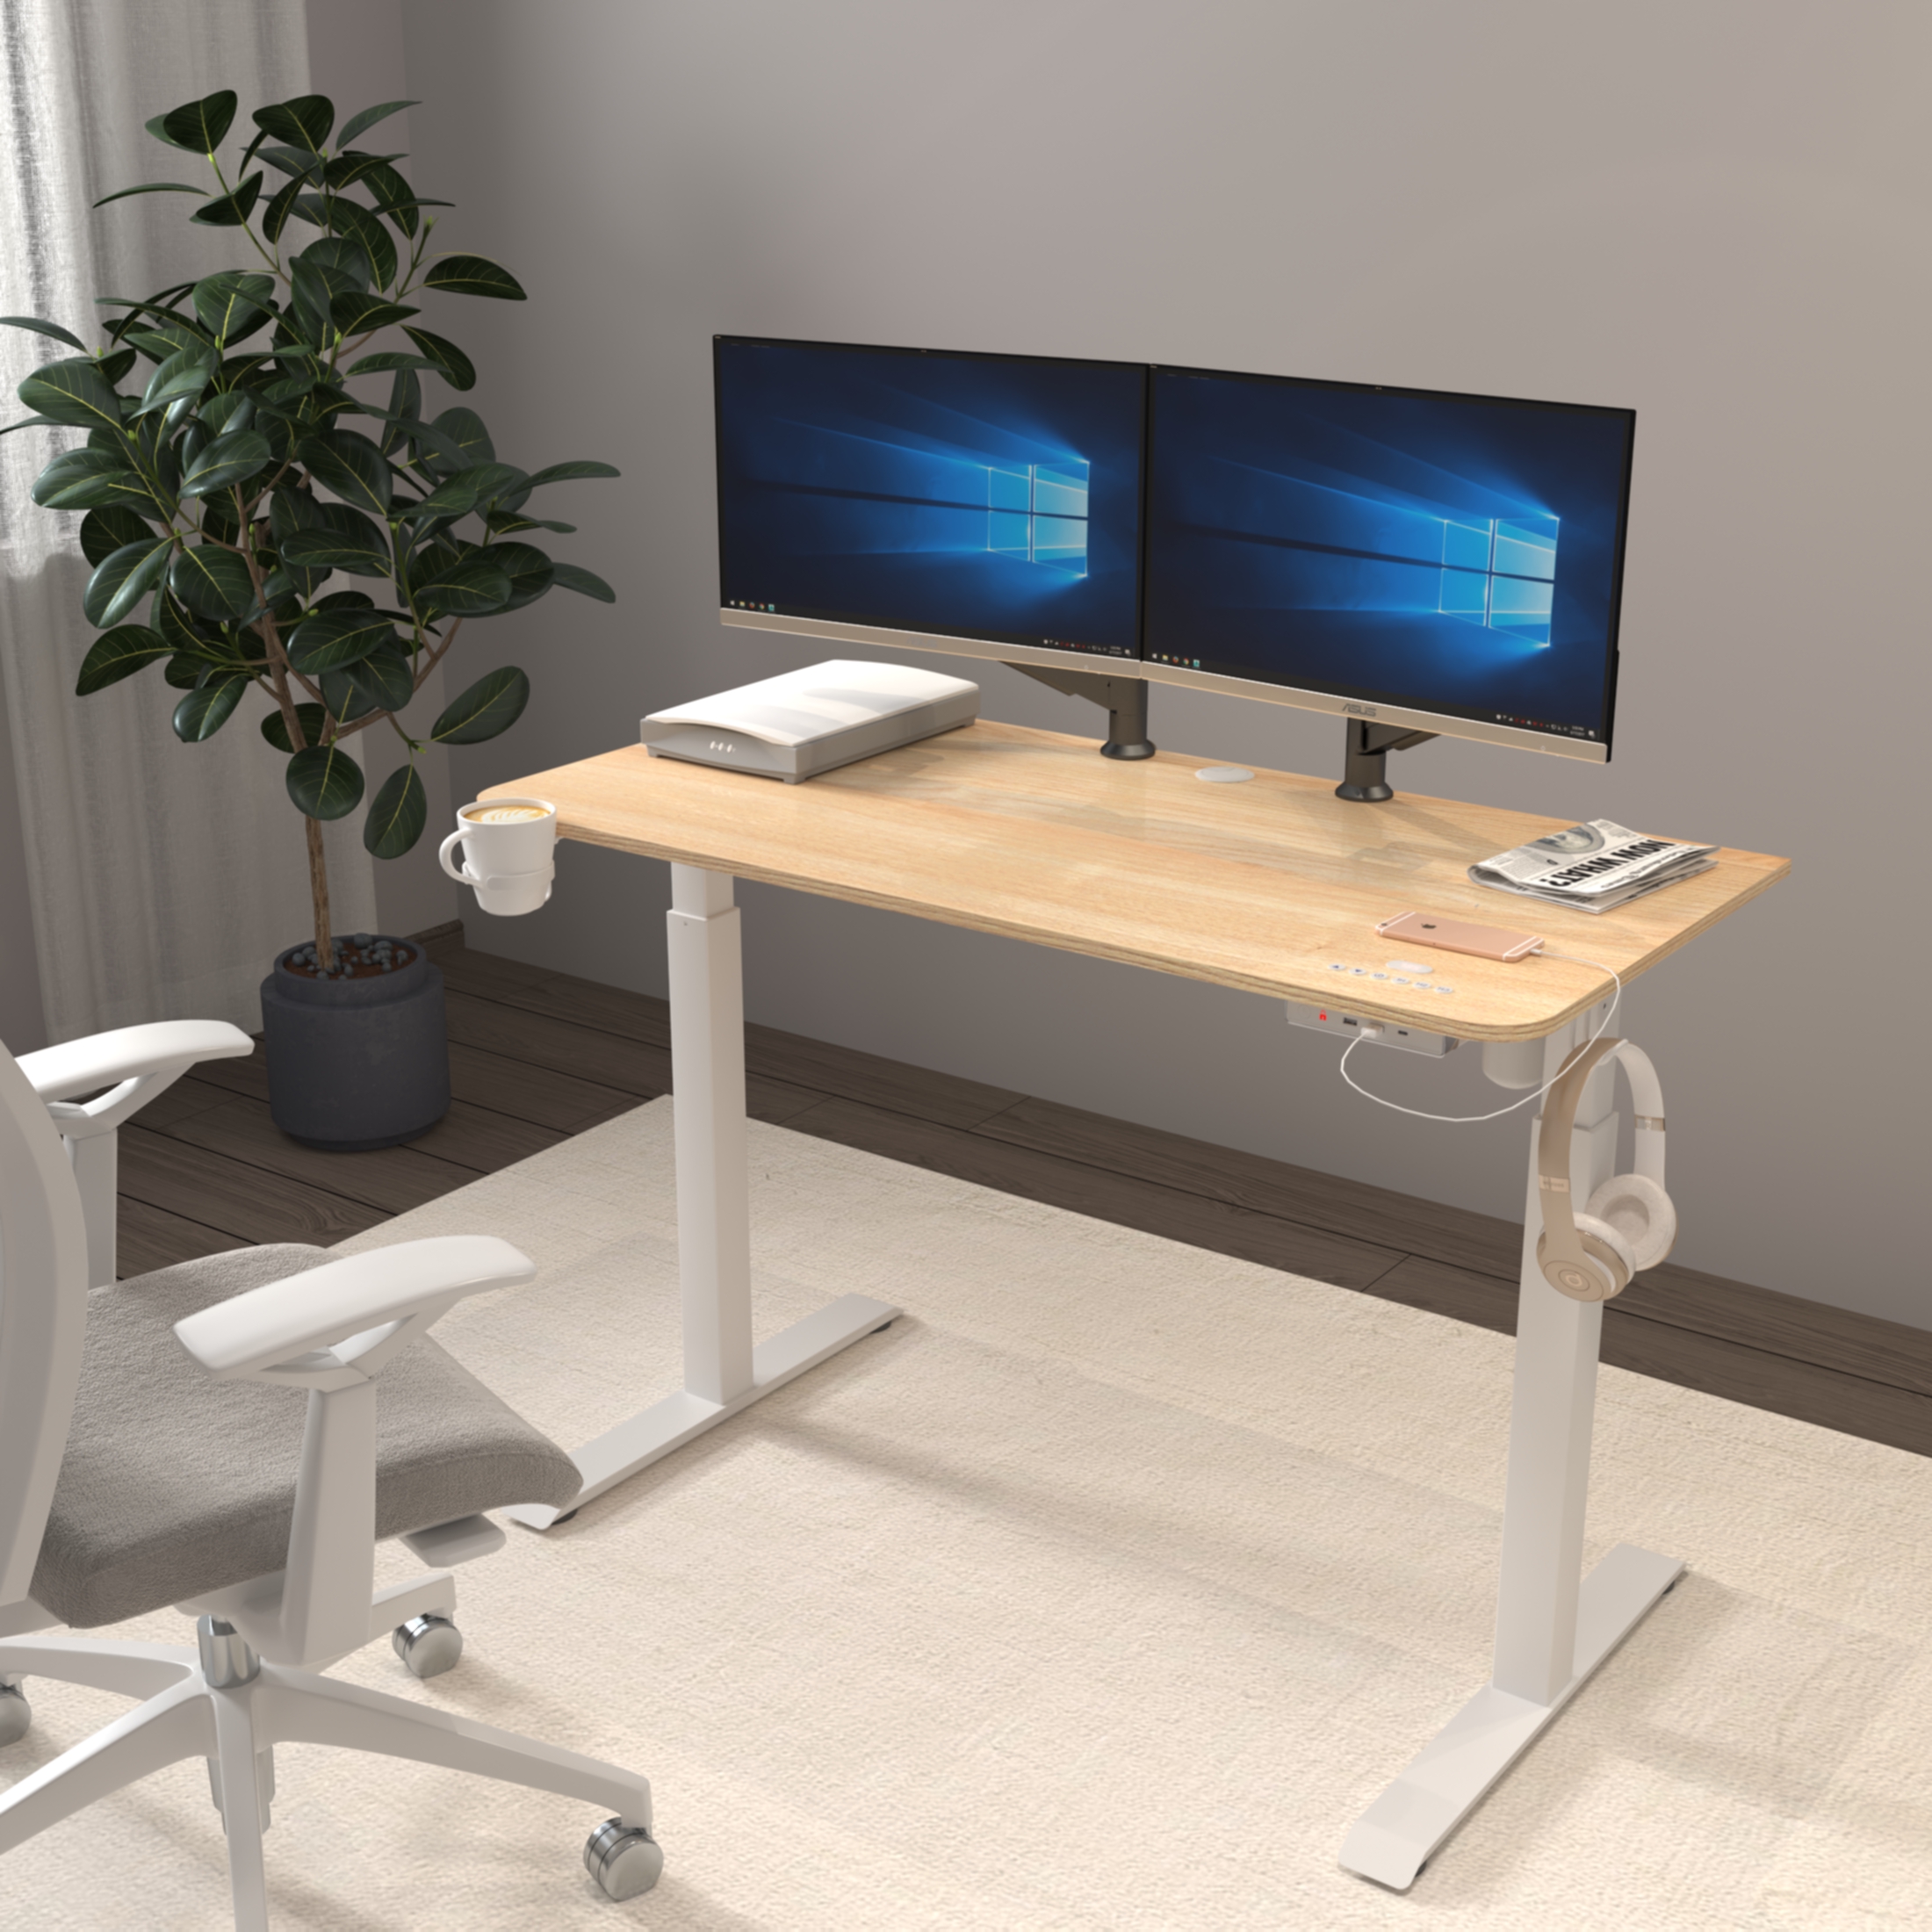 Mainstays Height Adjustable Standing Desk with USB  Type C in Wood Color Height 28 to 47 inches - image 1 of 12